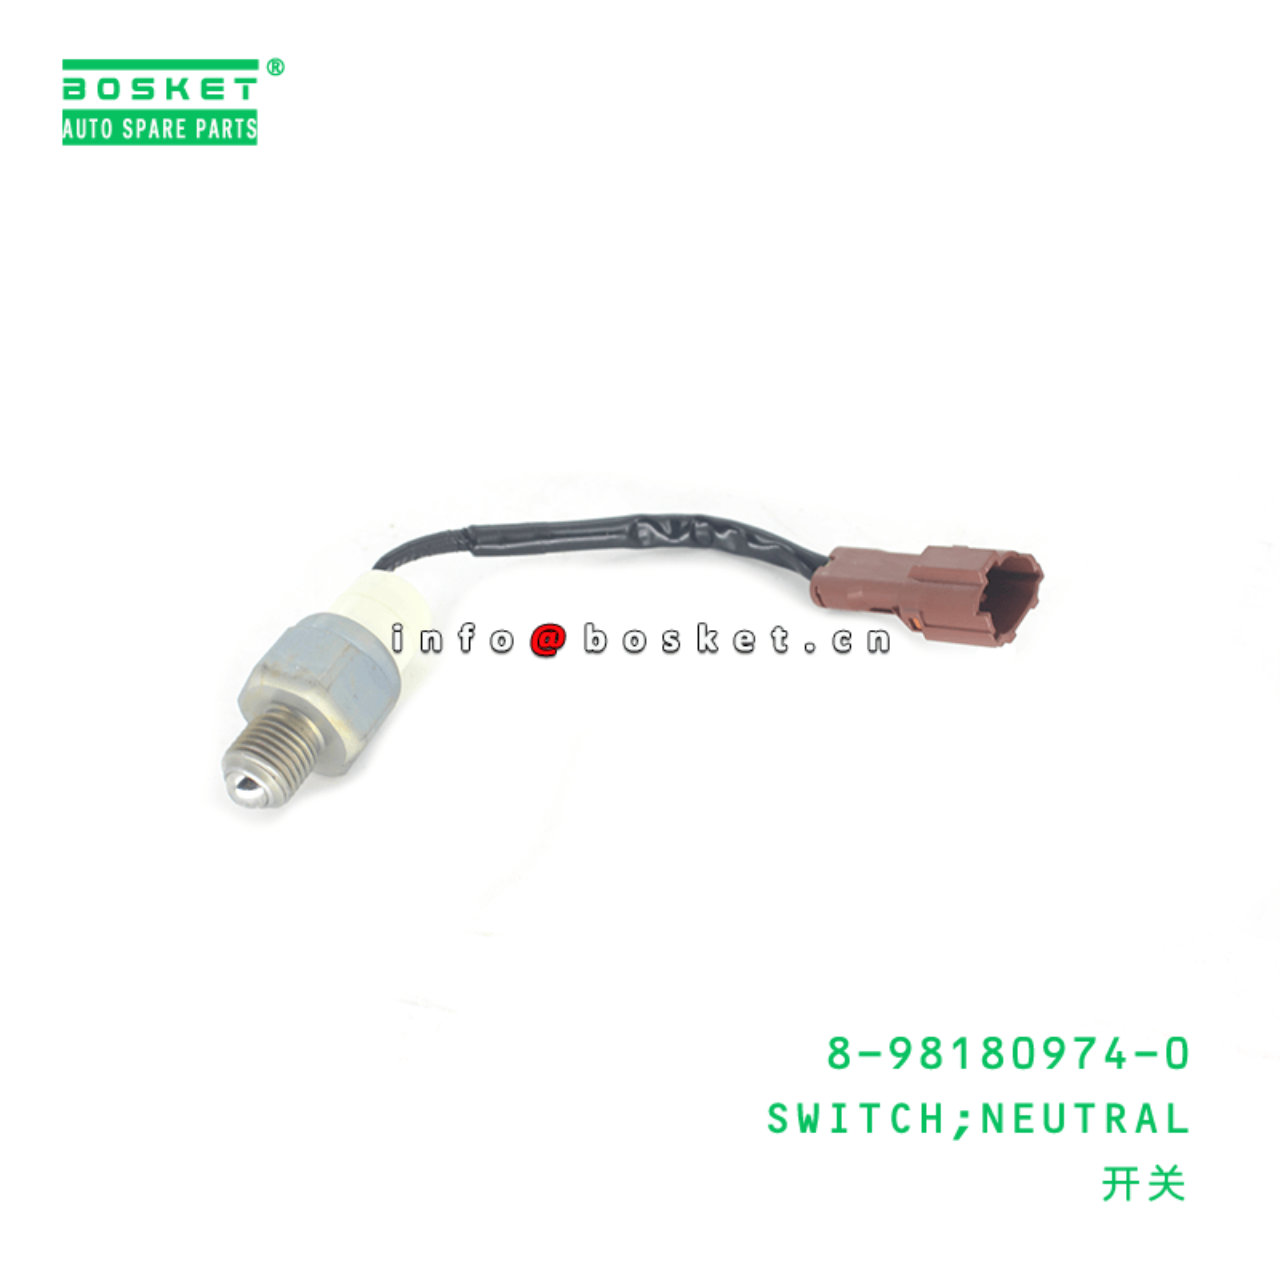 8-98180974-0 Neutral Switch 8981809740 Suitable for ISUZU TFR